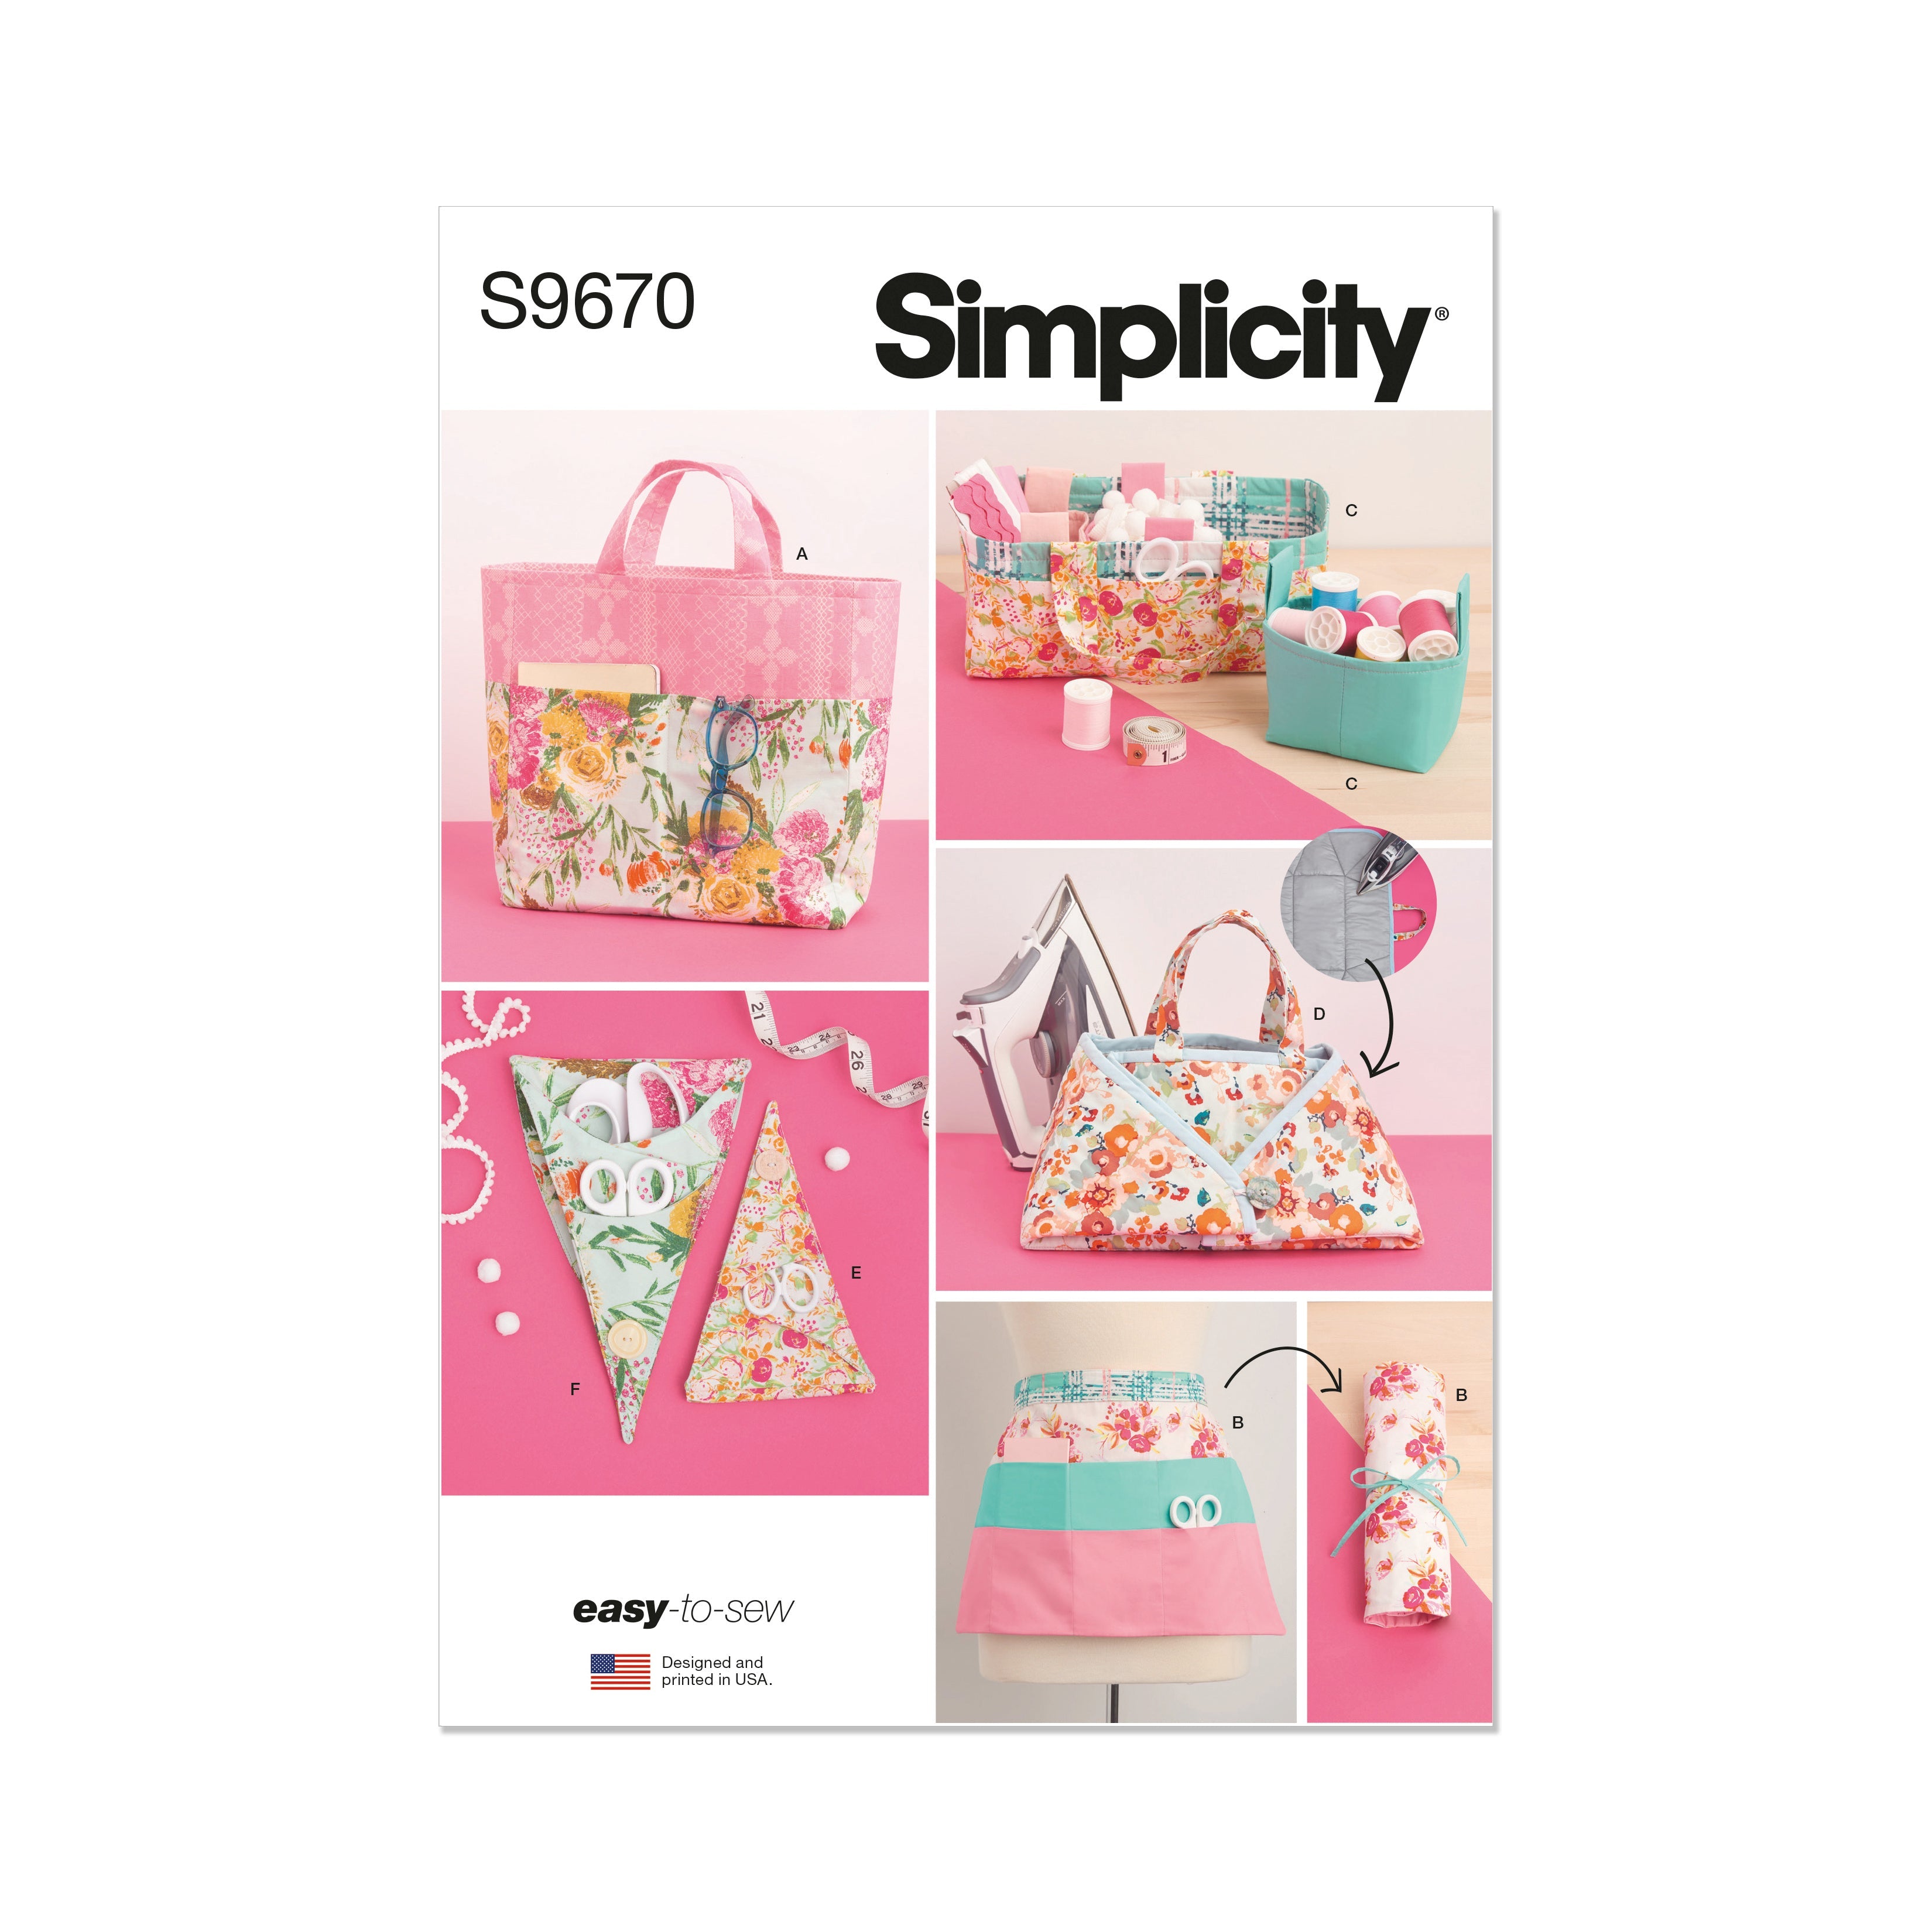 Simplicity pattern 9670 Sewing Room Accessories from Jaycotts Sewing Supplies